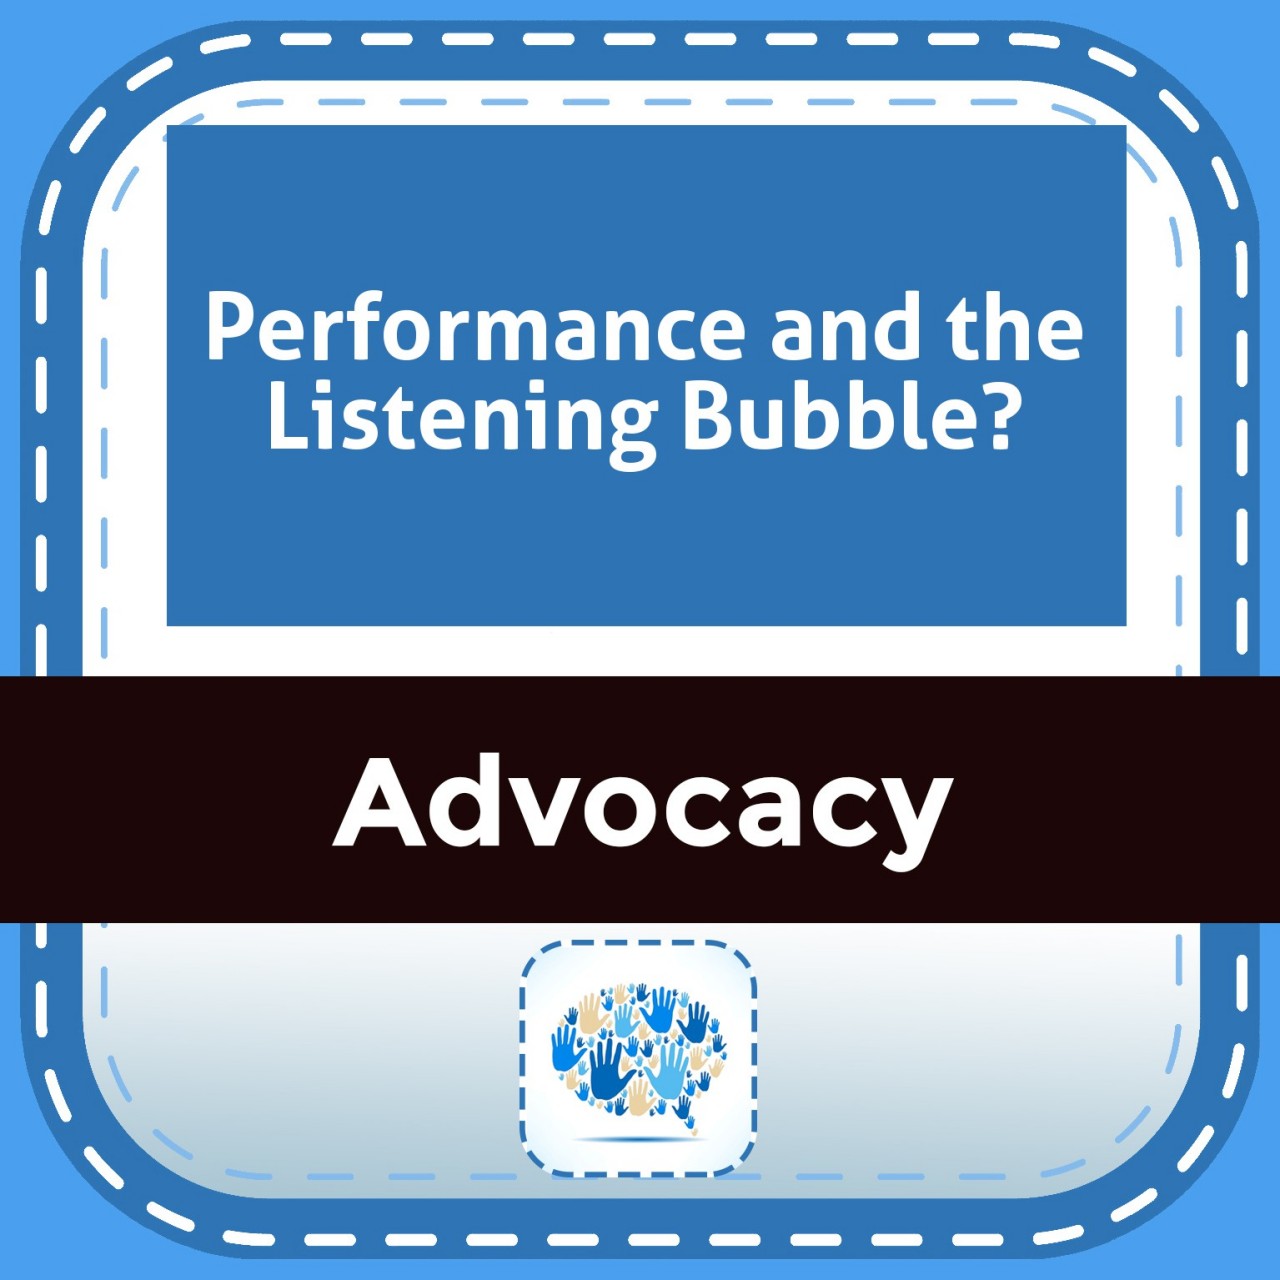 Performance and the Listening Bubble?